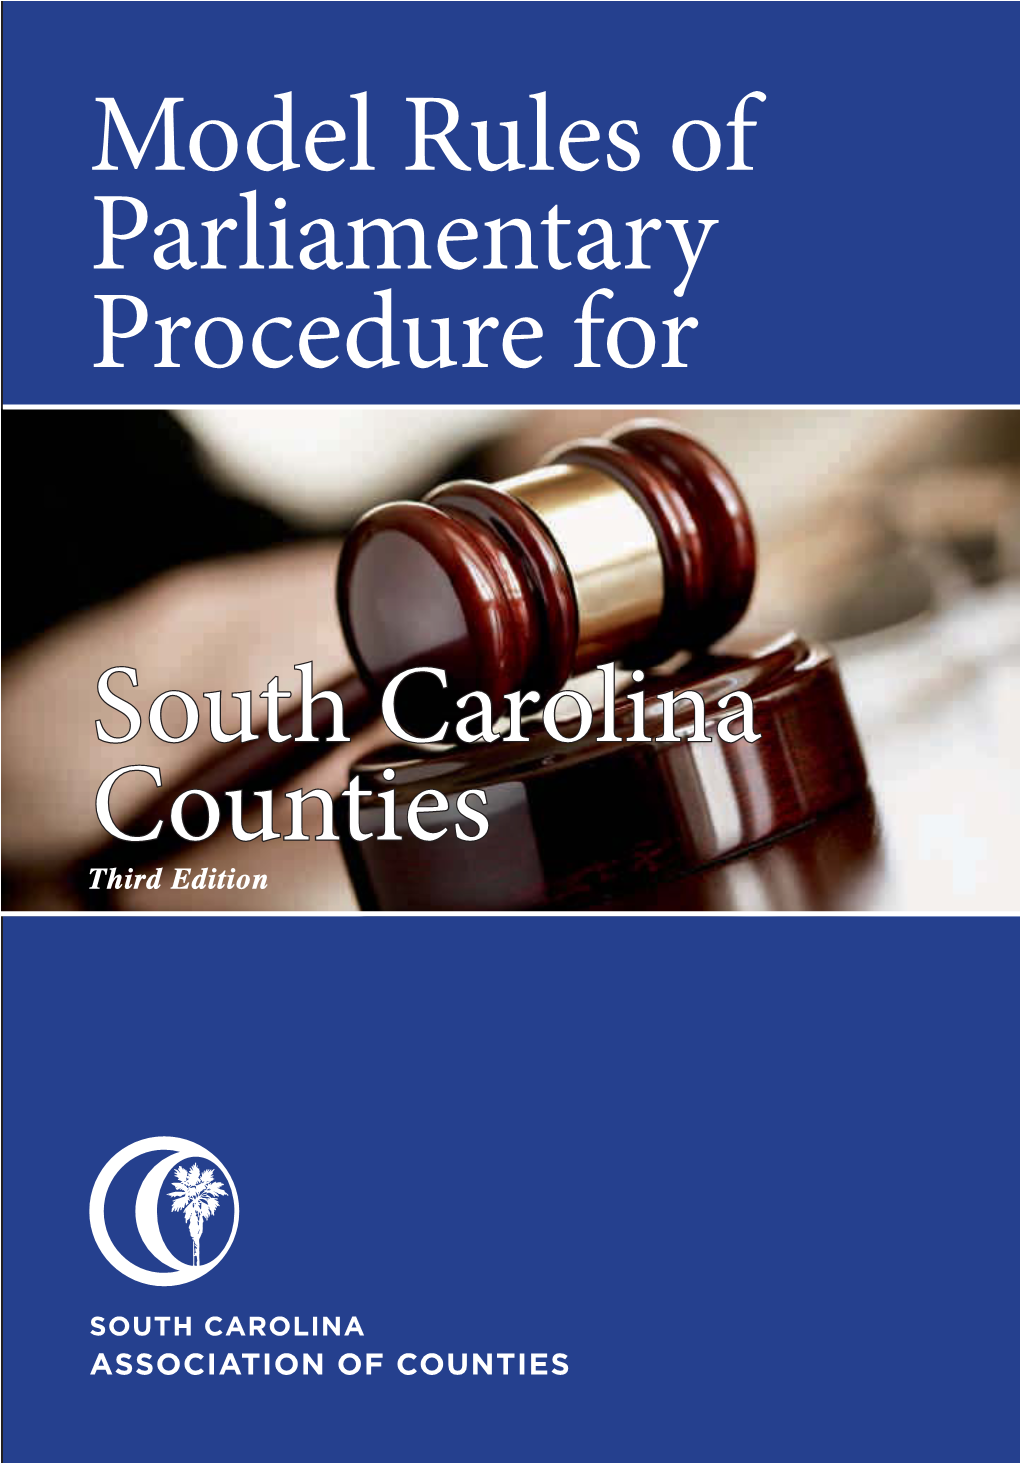 Model Rules of Parliamentary Procedure for South Carolina Counties, Third Edition